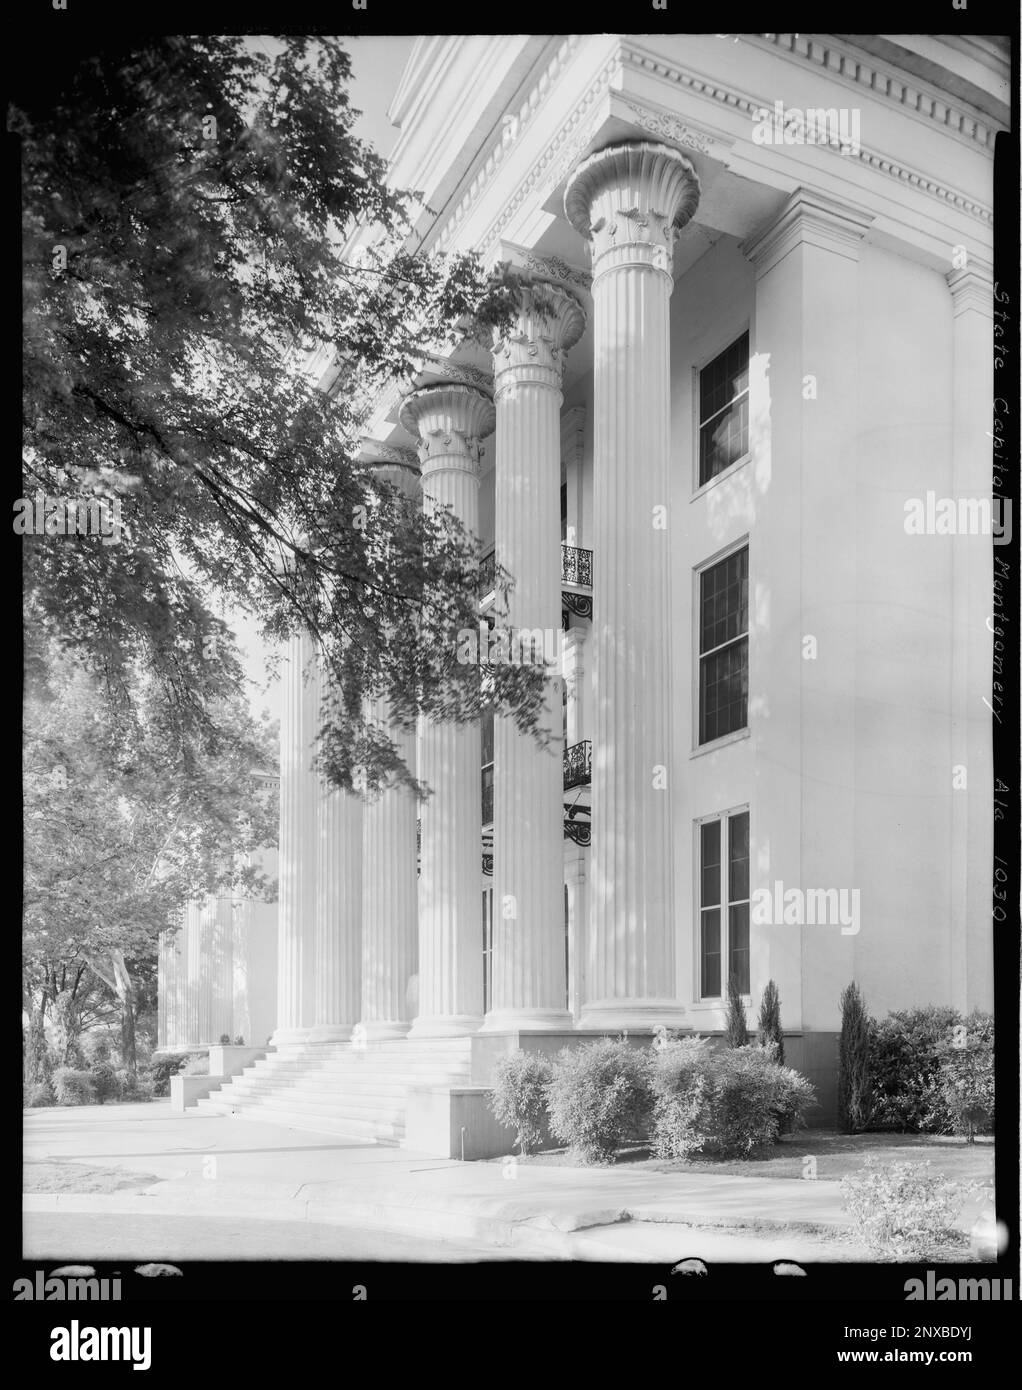 State Capitol, Montgomery, Montgomery County, Alabama. Carnegie Survey of the Architecture of the South (Carnegie-Umfrage zur Architektur des Südens). Vereinigte Staaten, Alabama, Montgomery County, Montgomery, Capitols, Säulen, Porticoes, Porches, Capitals, Columns. Stockfoto